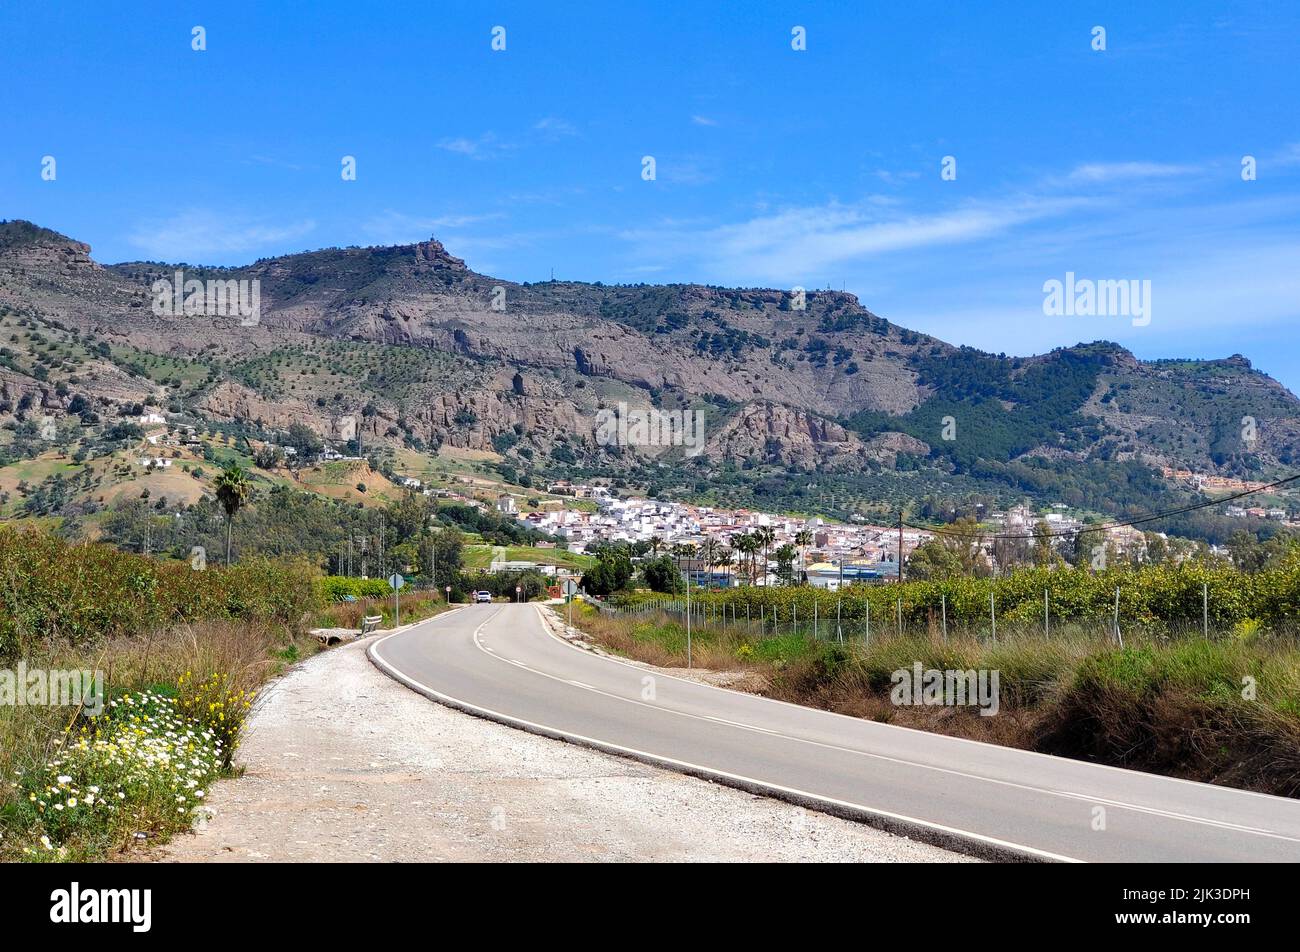 Rural village in the mountains of Malaga in springtime Stock Photo